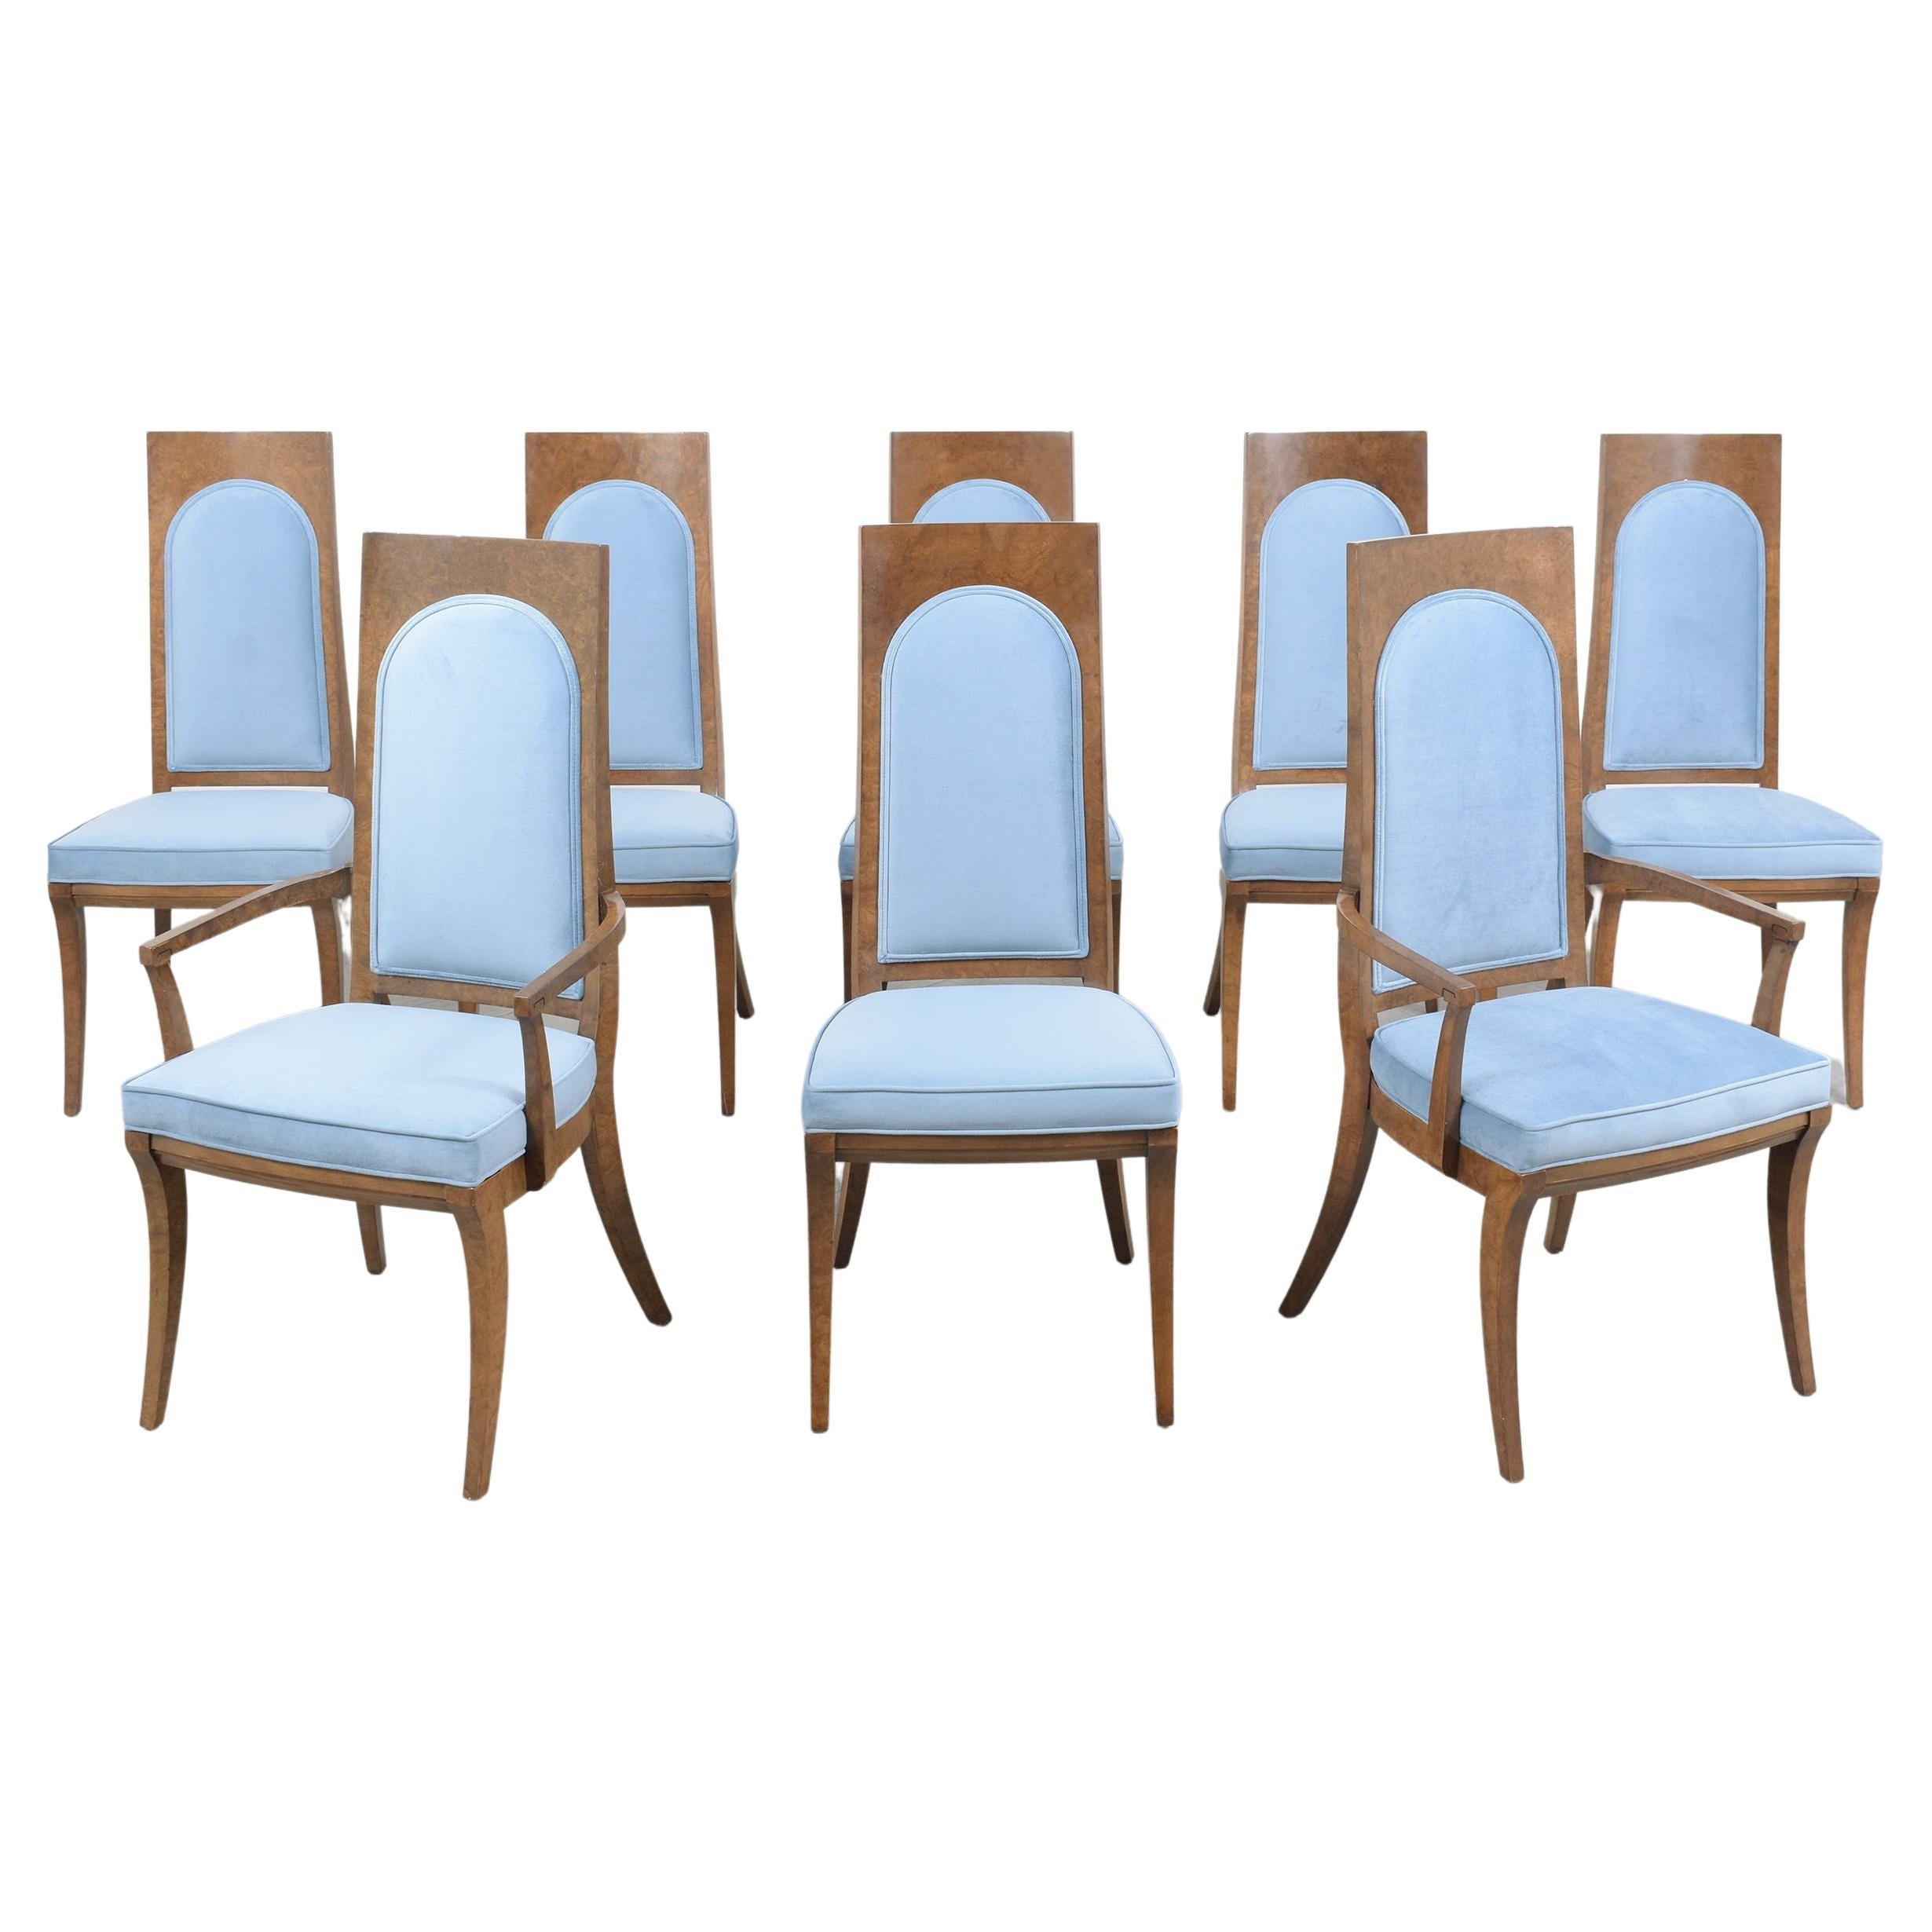 Restored Mid-Century Modern 1960s Mastercraft Solid Wood Dining Chairs Set For Sale